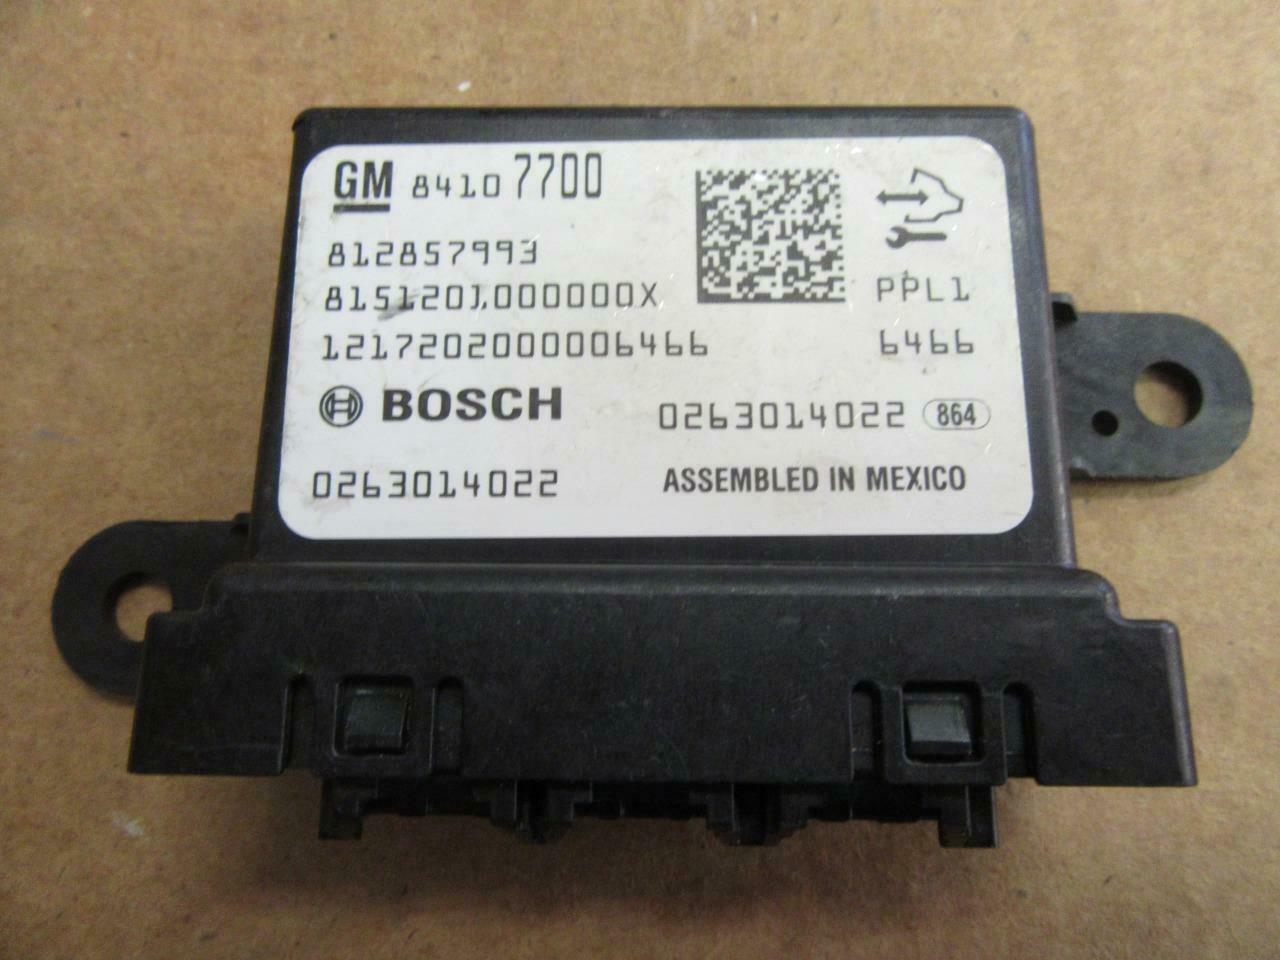 OEM 2017 Cadillac Escalade SUV Parking Assist Chassis Control Module 84107700 - $32.99